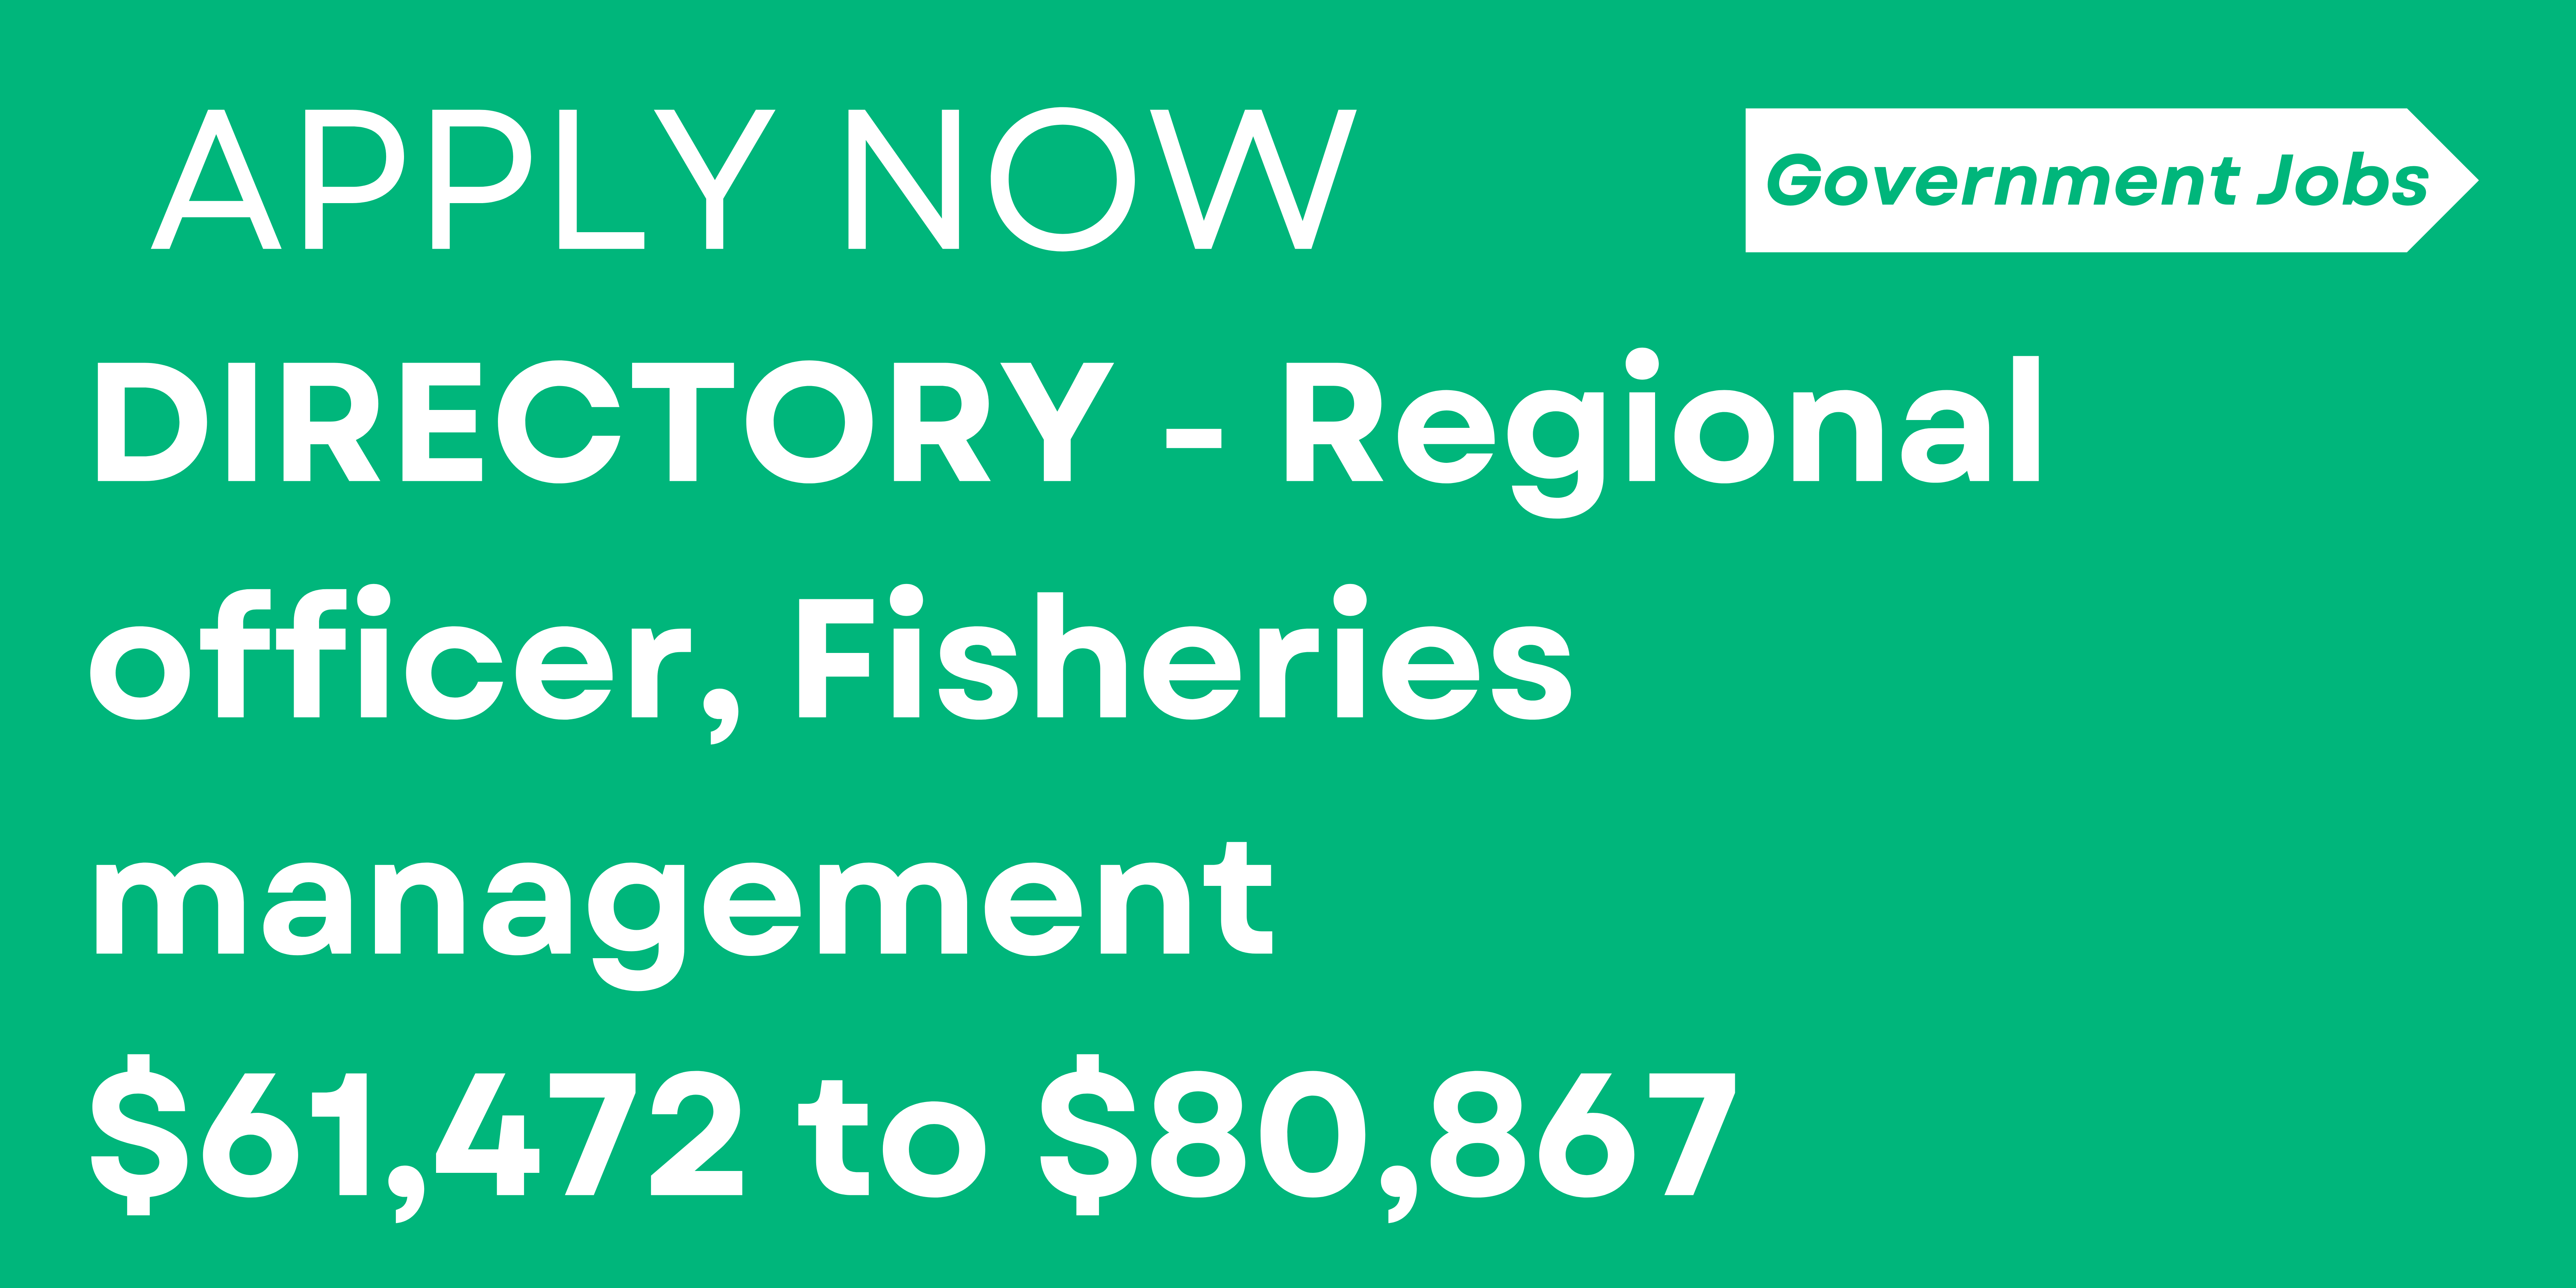 DIRECTORY - Regional officer, Fisheries management